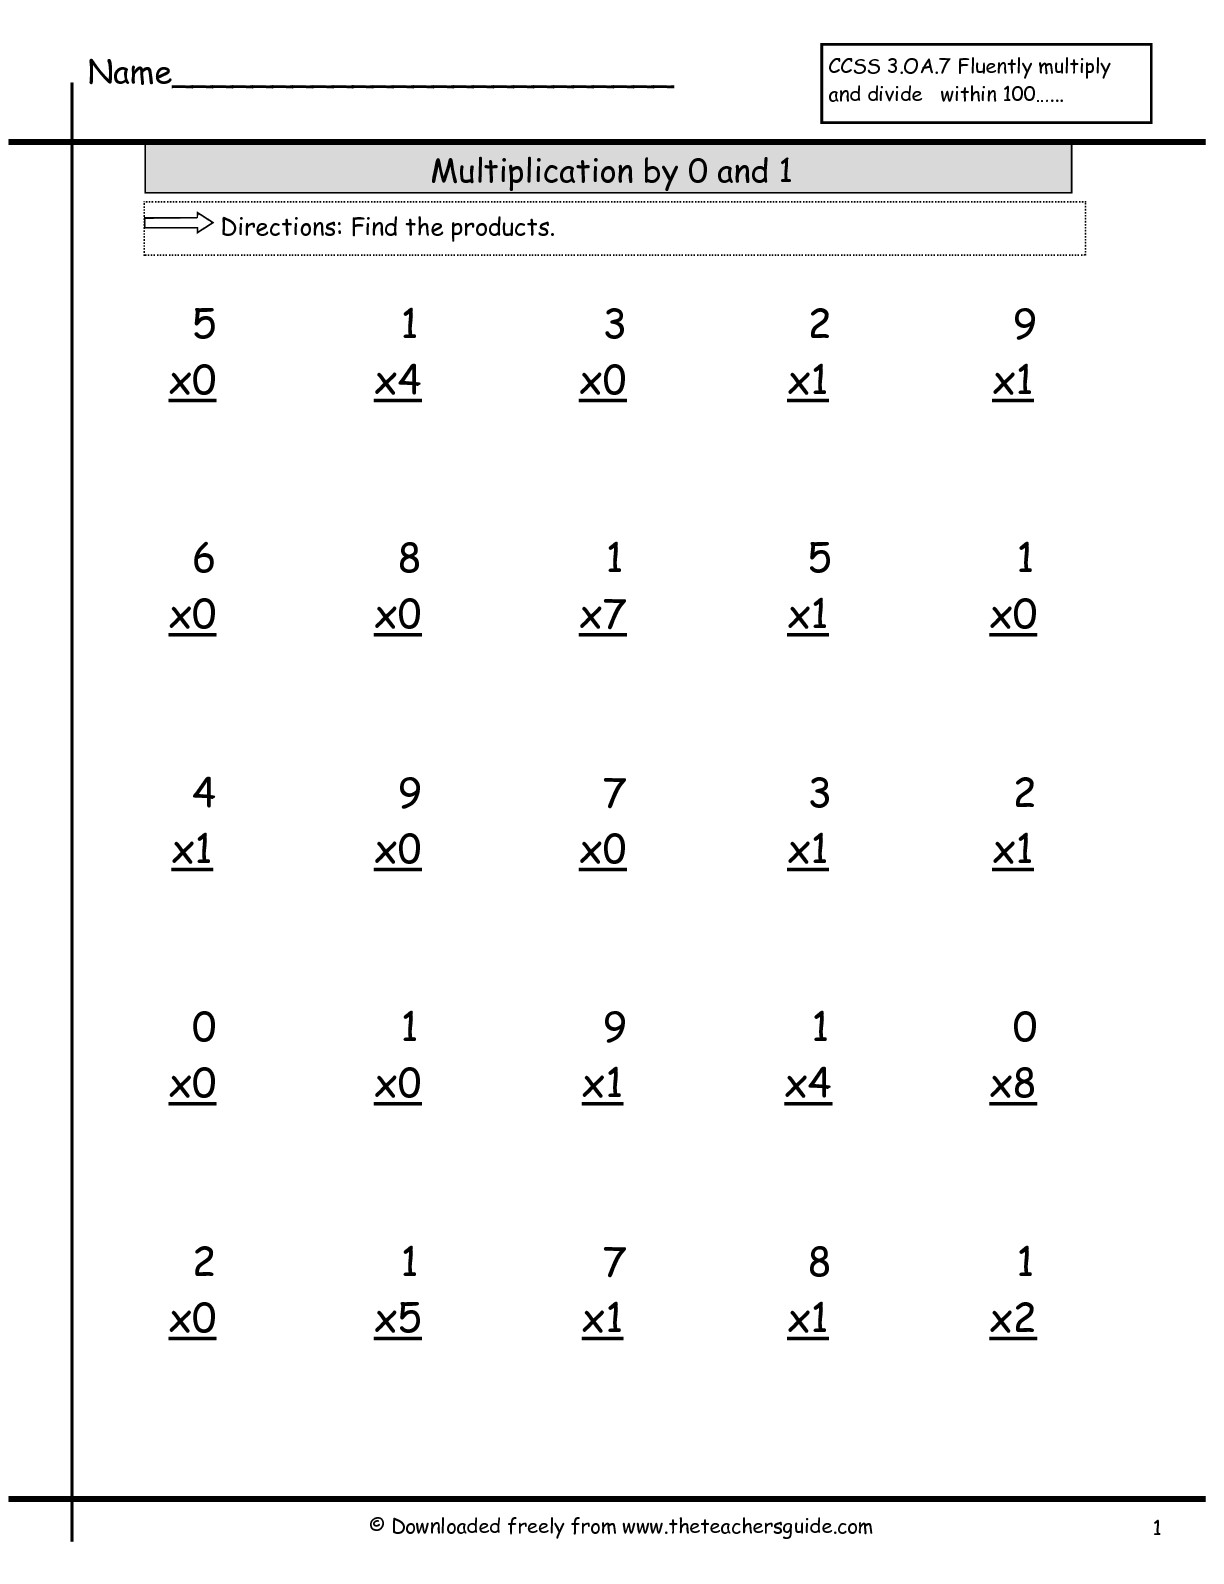 Multiplication Facts Worksheets From The Teacher Guide Zero